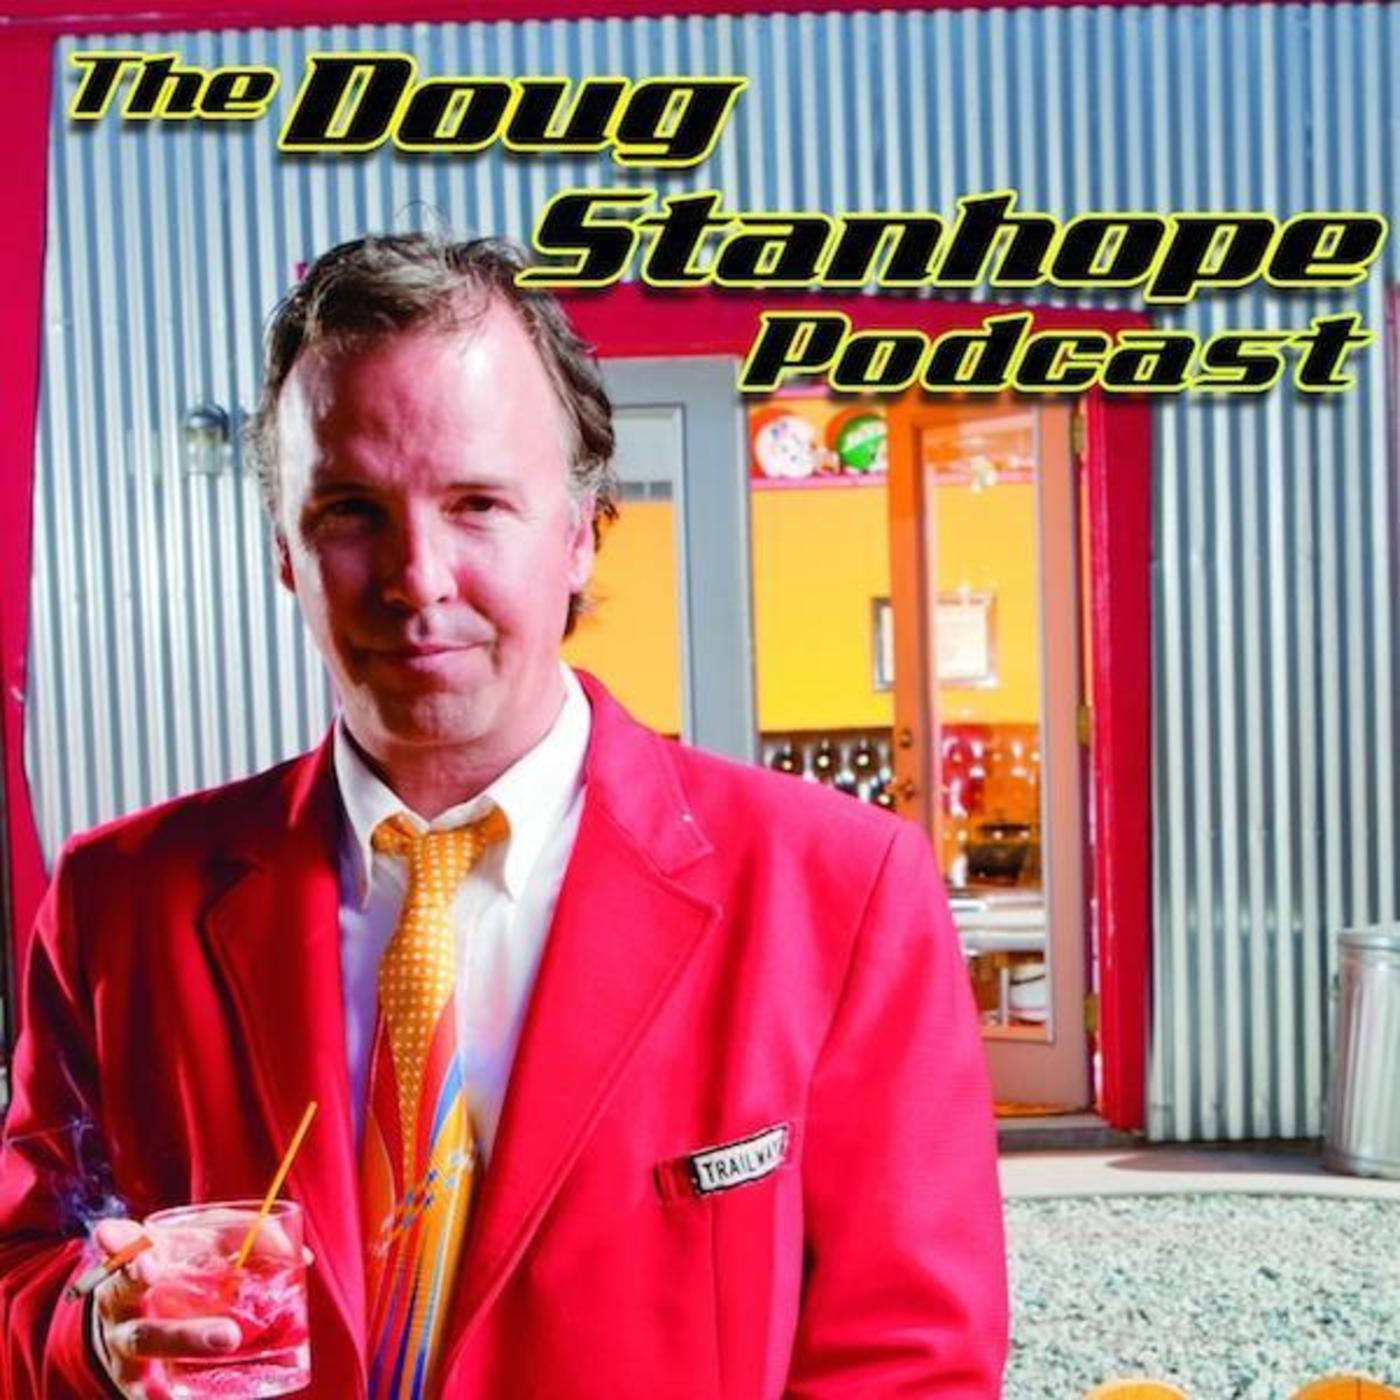 Stanhope Talks to Some 8 year old Kid - pt.2